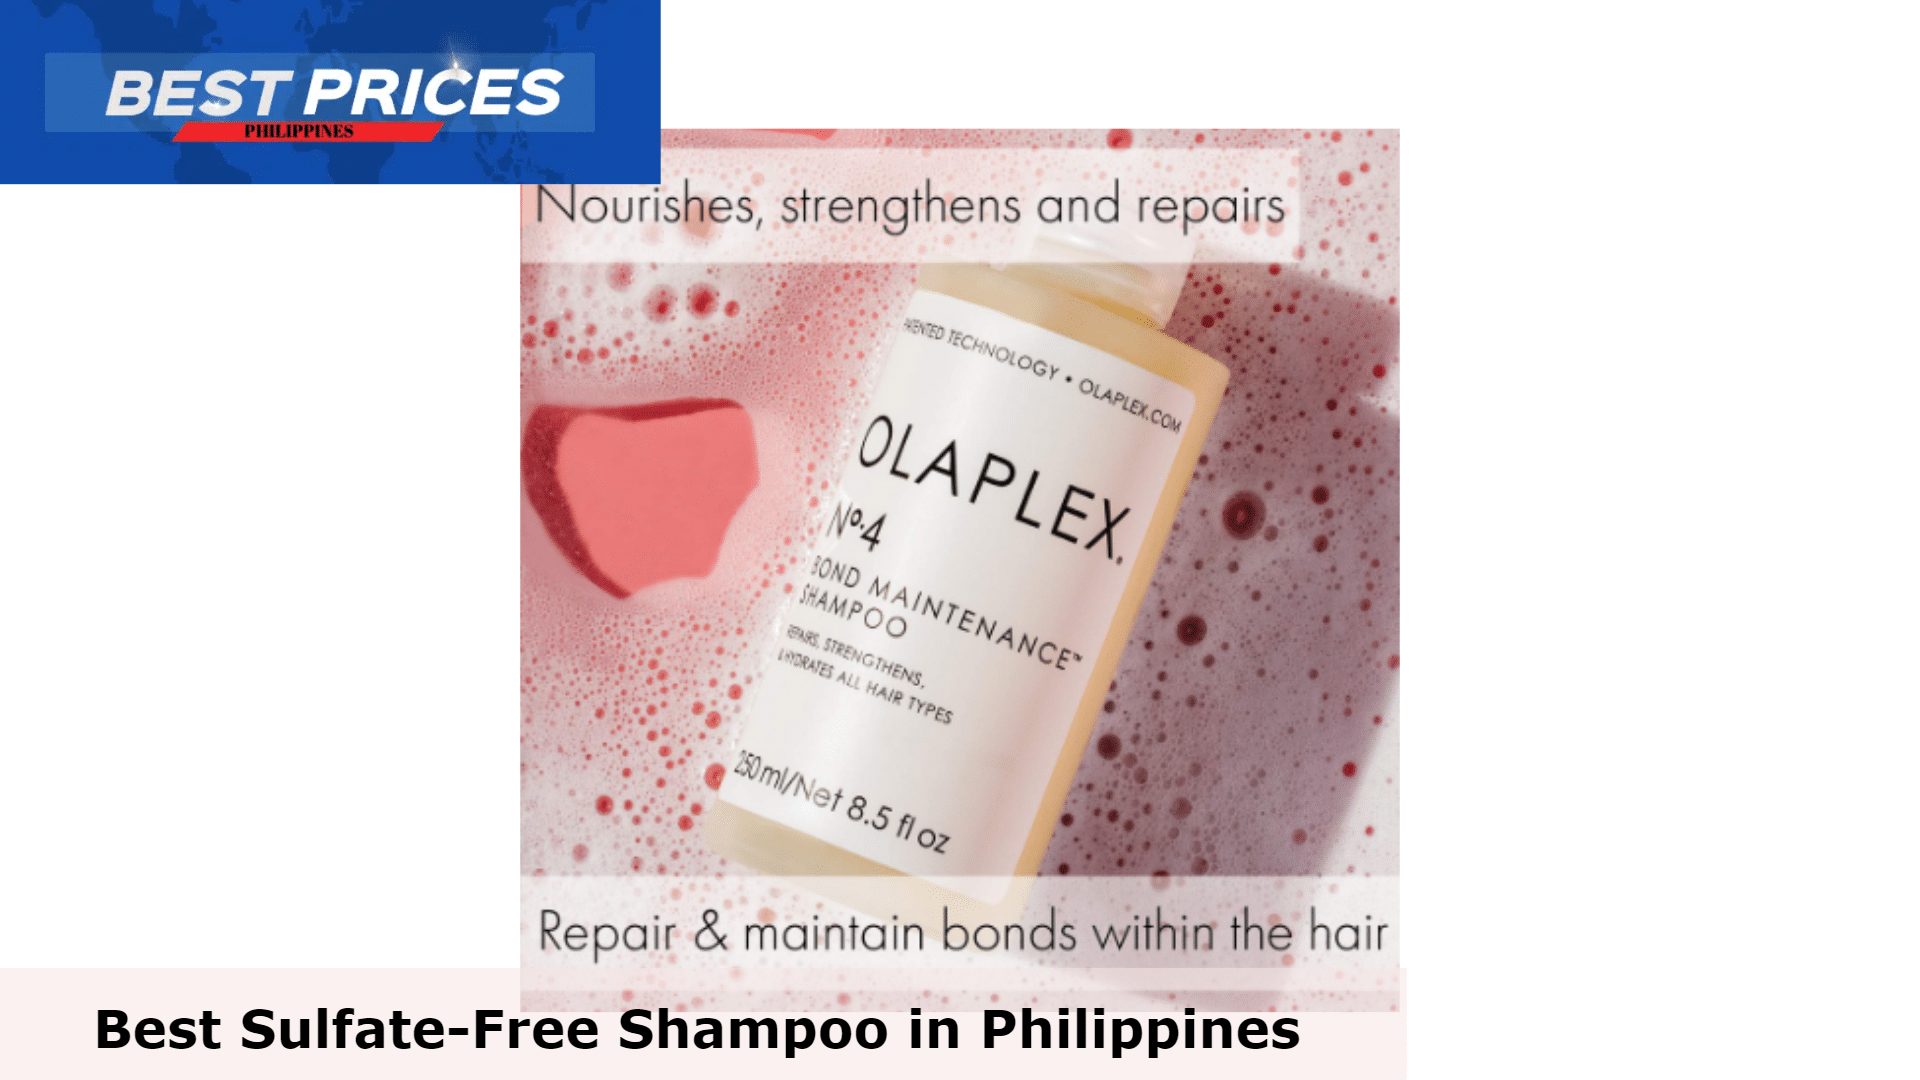 Olaplex No. 4 Bond Maintenance Shampoo - Sulfate-Free Shampoo Philippines, Sulfate-Free Shampoo Philippines, Is sulfate-free shampoo good for your hair?, Which shampoo is sulphate free?, Do sulfates cause hairloss?, What does sulfate-free mean?, 
sulfate-free shampoo and conditioner, sulfate-free shampoo drugstore, sulfate-free shampoo and conditioner for colored hair, best sulfate-free shampoo drugstore, sulfate-free shampoo for curly hair, best sulfate-free shampoo and conditioner, sulfate-free shampoo for oily hair, sulfate-free shampoo for botox treated hair, sulfate-free shampoo philippines for hair loss,